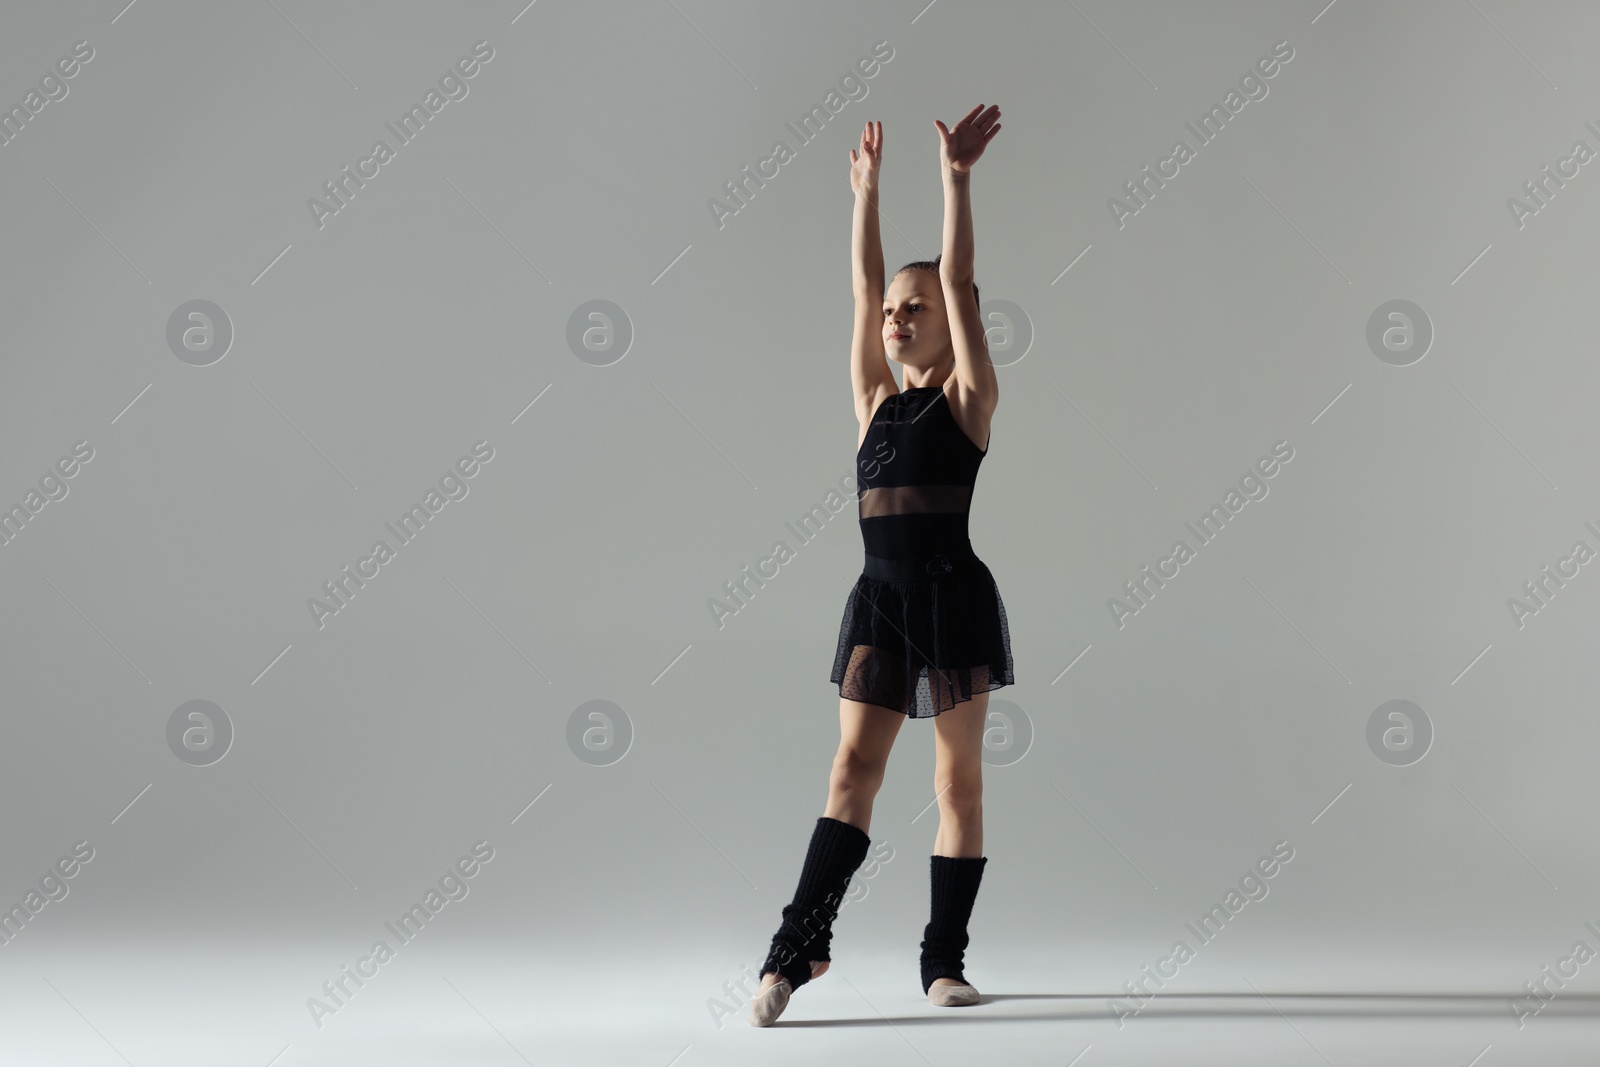 Photo of Cute little gymnast in stage clothes on white background